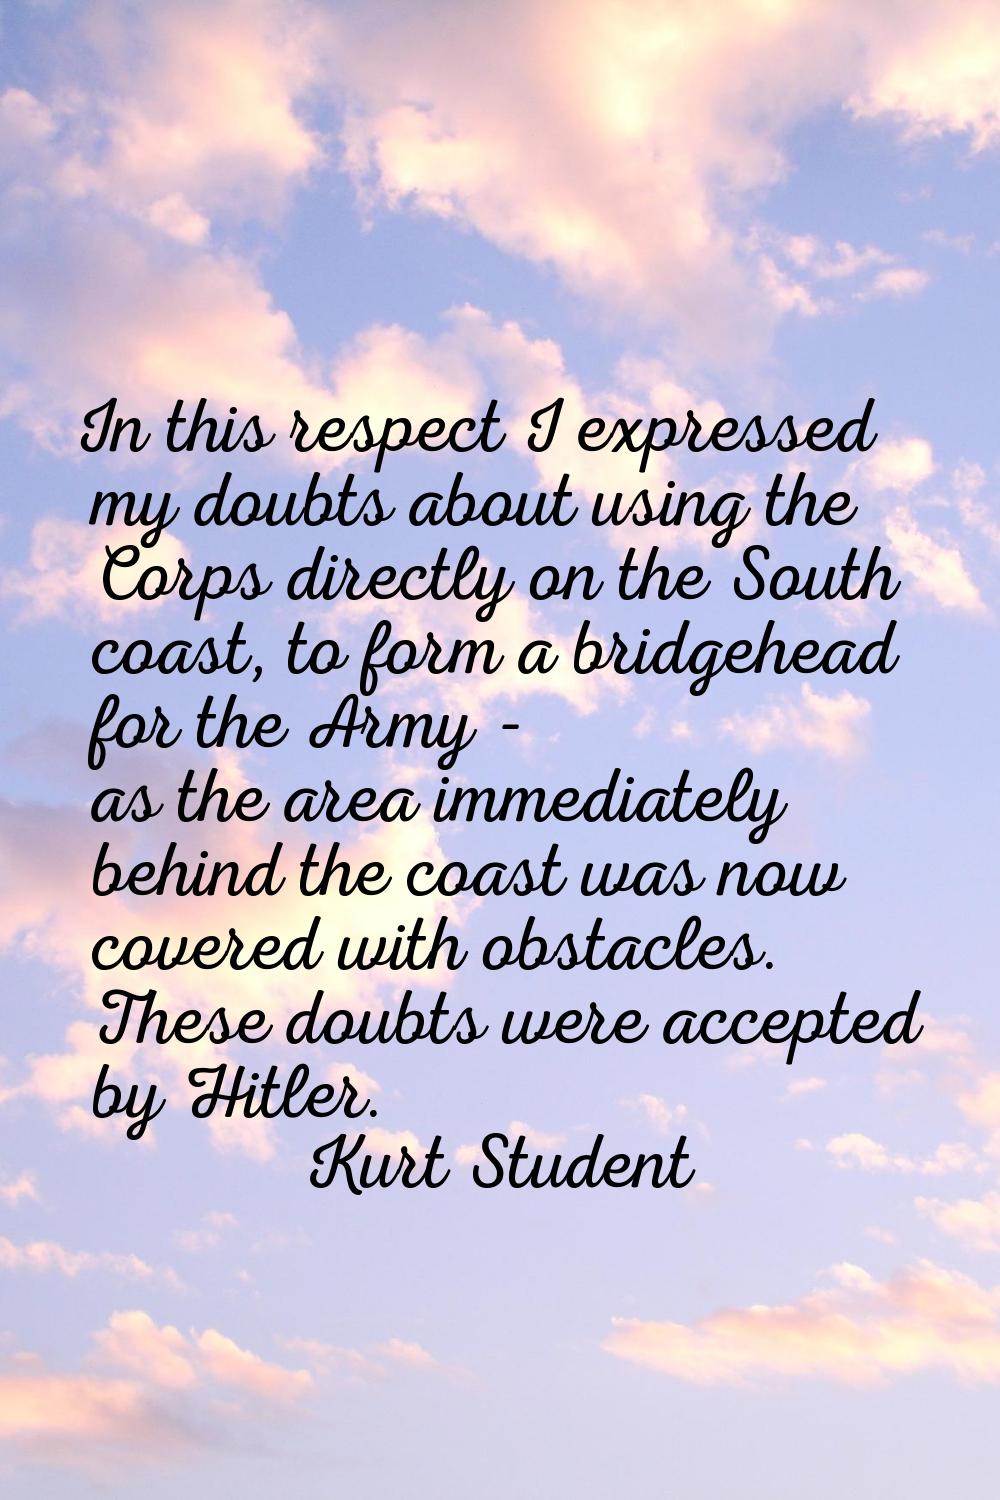 In this respect I expressed my doubts about using the Corps directly on the South coast, to form a 